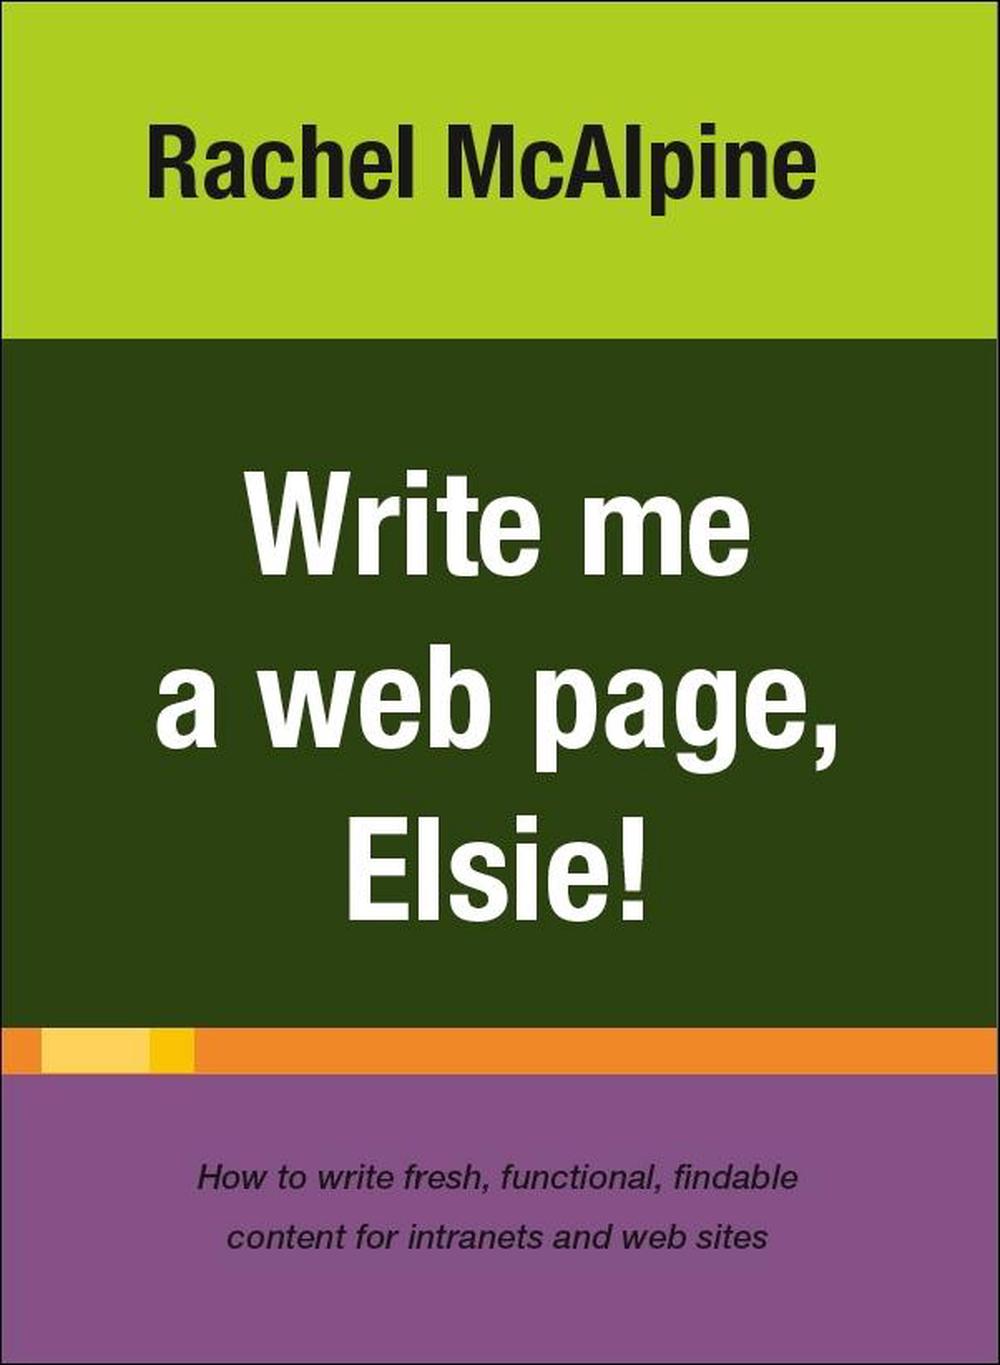 Write　Paperback,　online　at　9780473140427　Nile　Buy　by　Me　Elsie　Page　McAlpine,　a　The　Web　Rachel